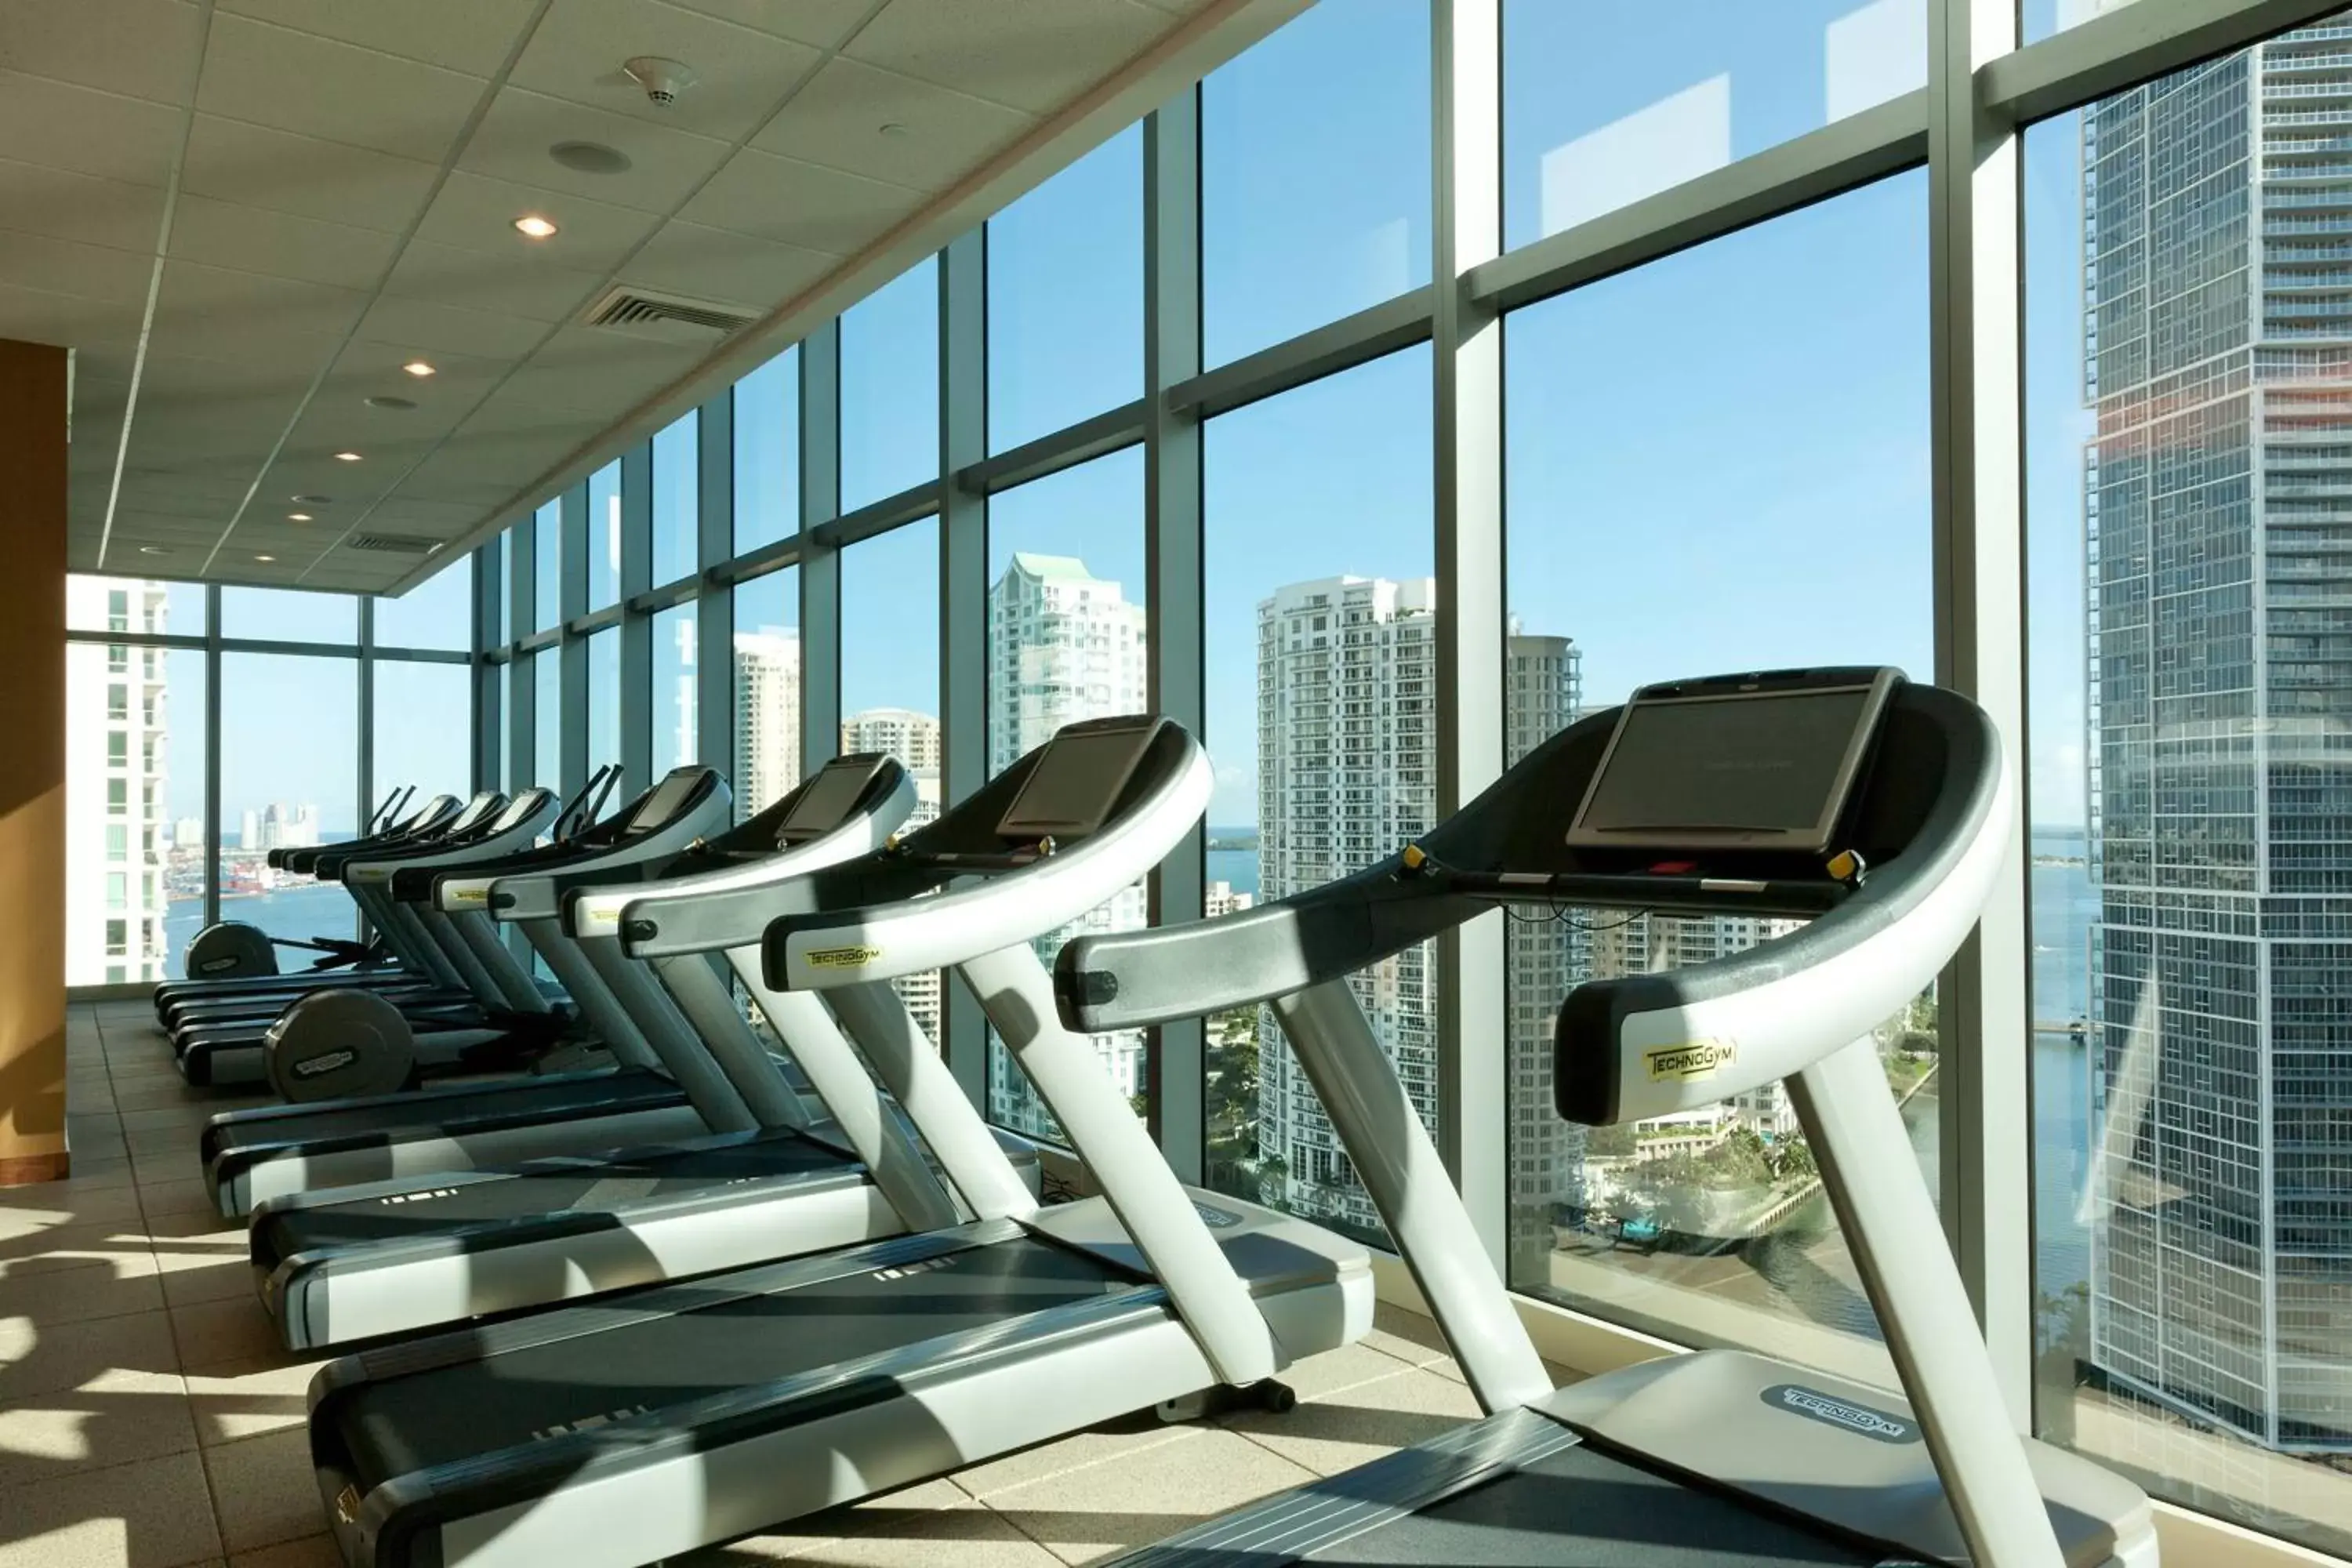 Fitness centre/facilities, Fitness Center/Facilities in JW Marriott Marquis Miami